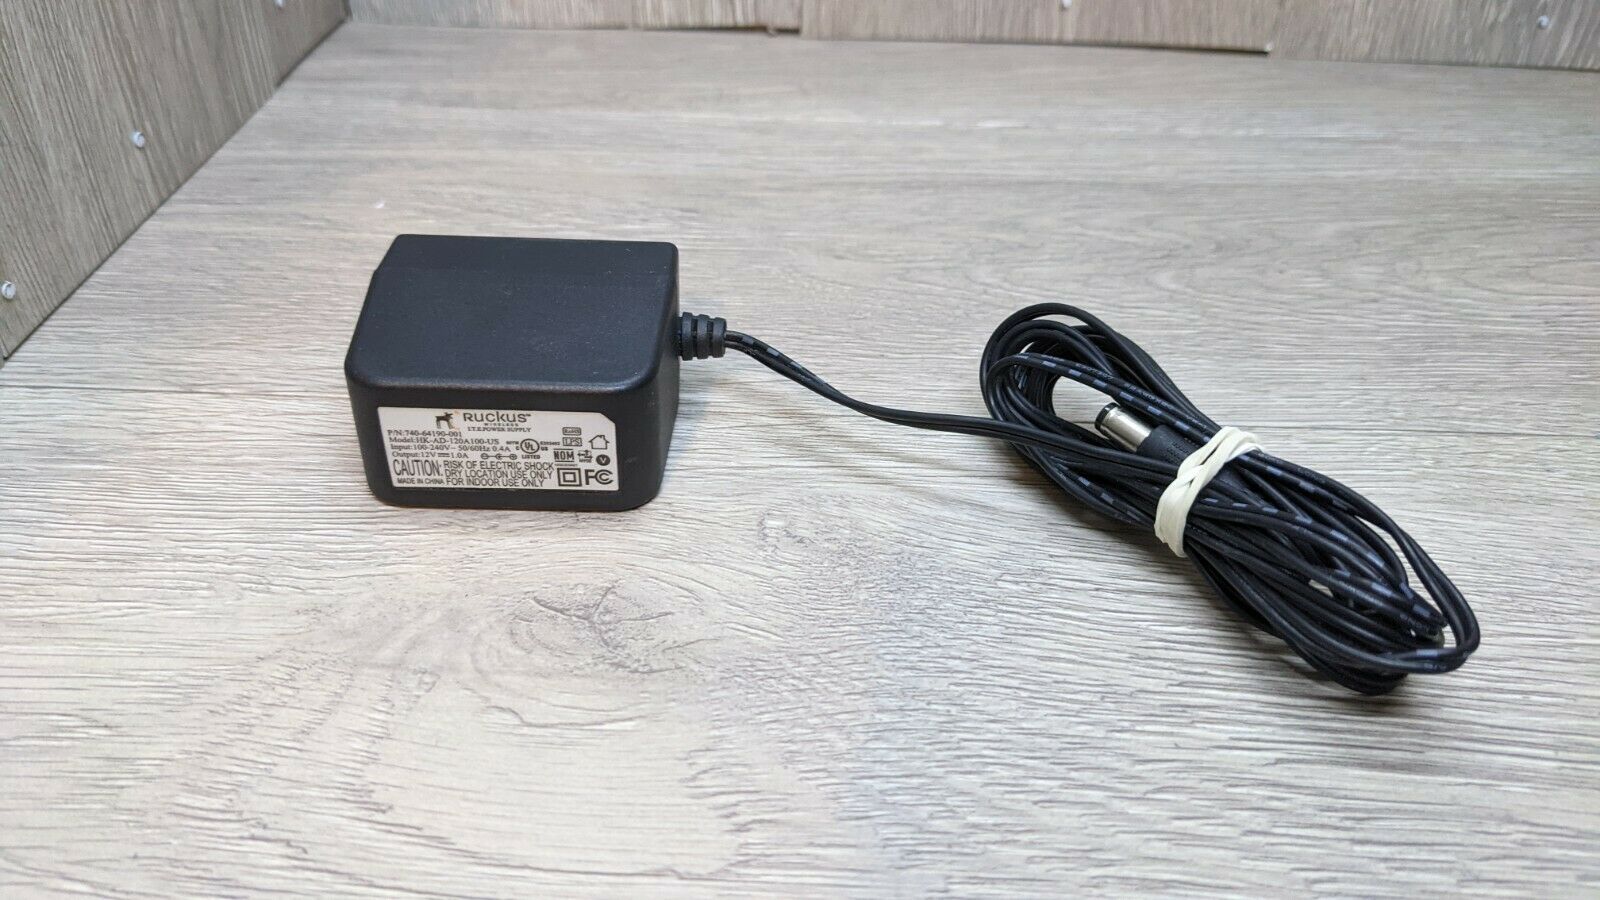 Ruckus Power Supply 12VDC 1.0A MPN 740-64190-001 Model HK-AD-120A100-US Type: AC/DC Adapter Features: Powered MPN: